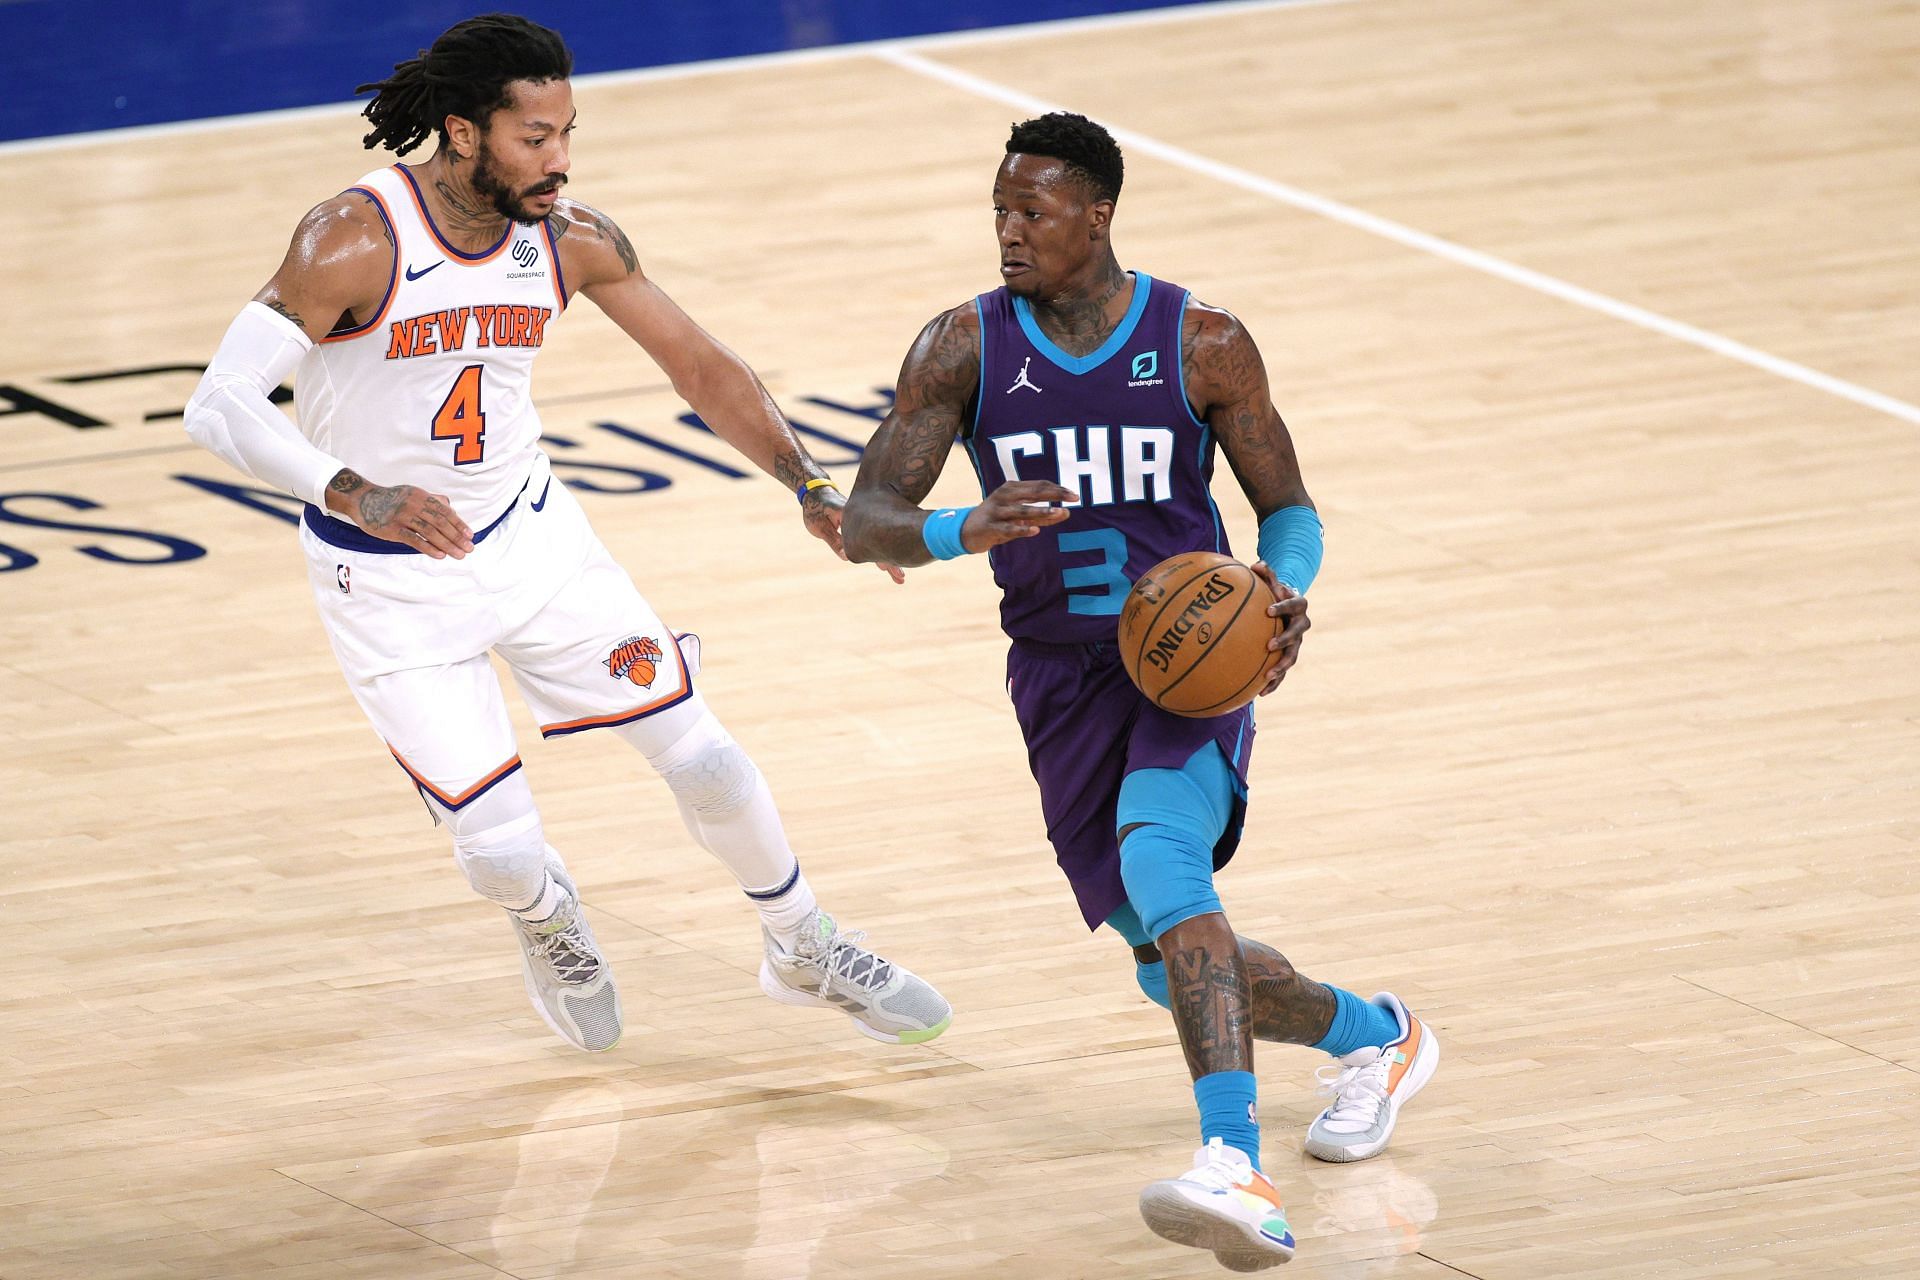 Terry Rozier of the Charlotte Hornets against Derrick Rose of the New York Knicks